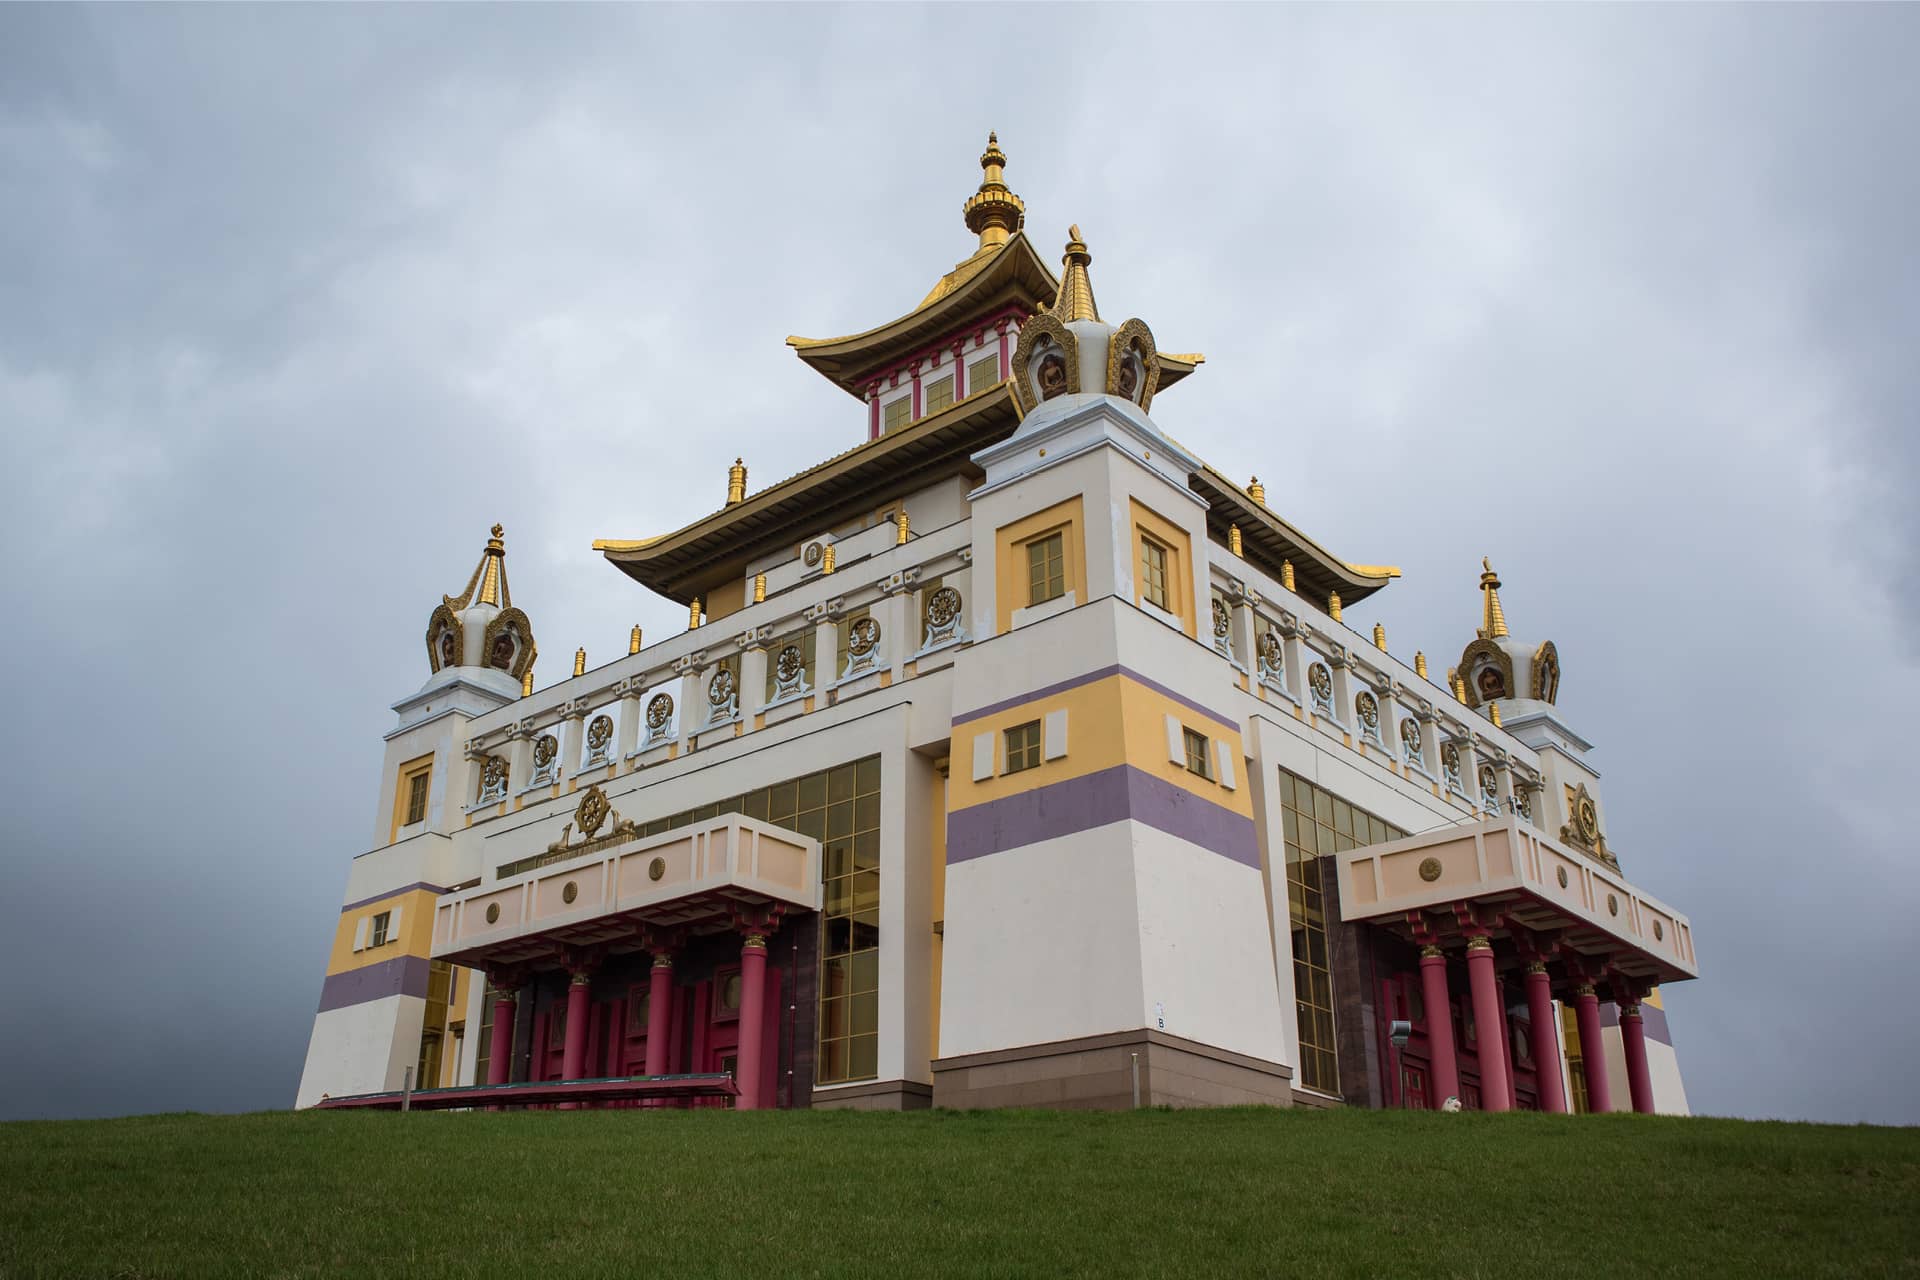 A massive white and golden Buddhist temple with red gates on a hill